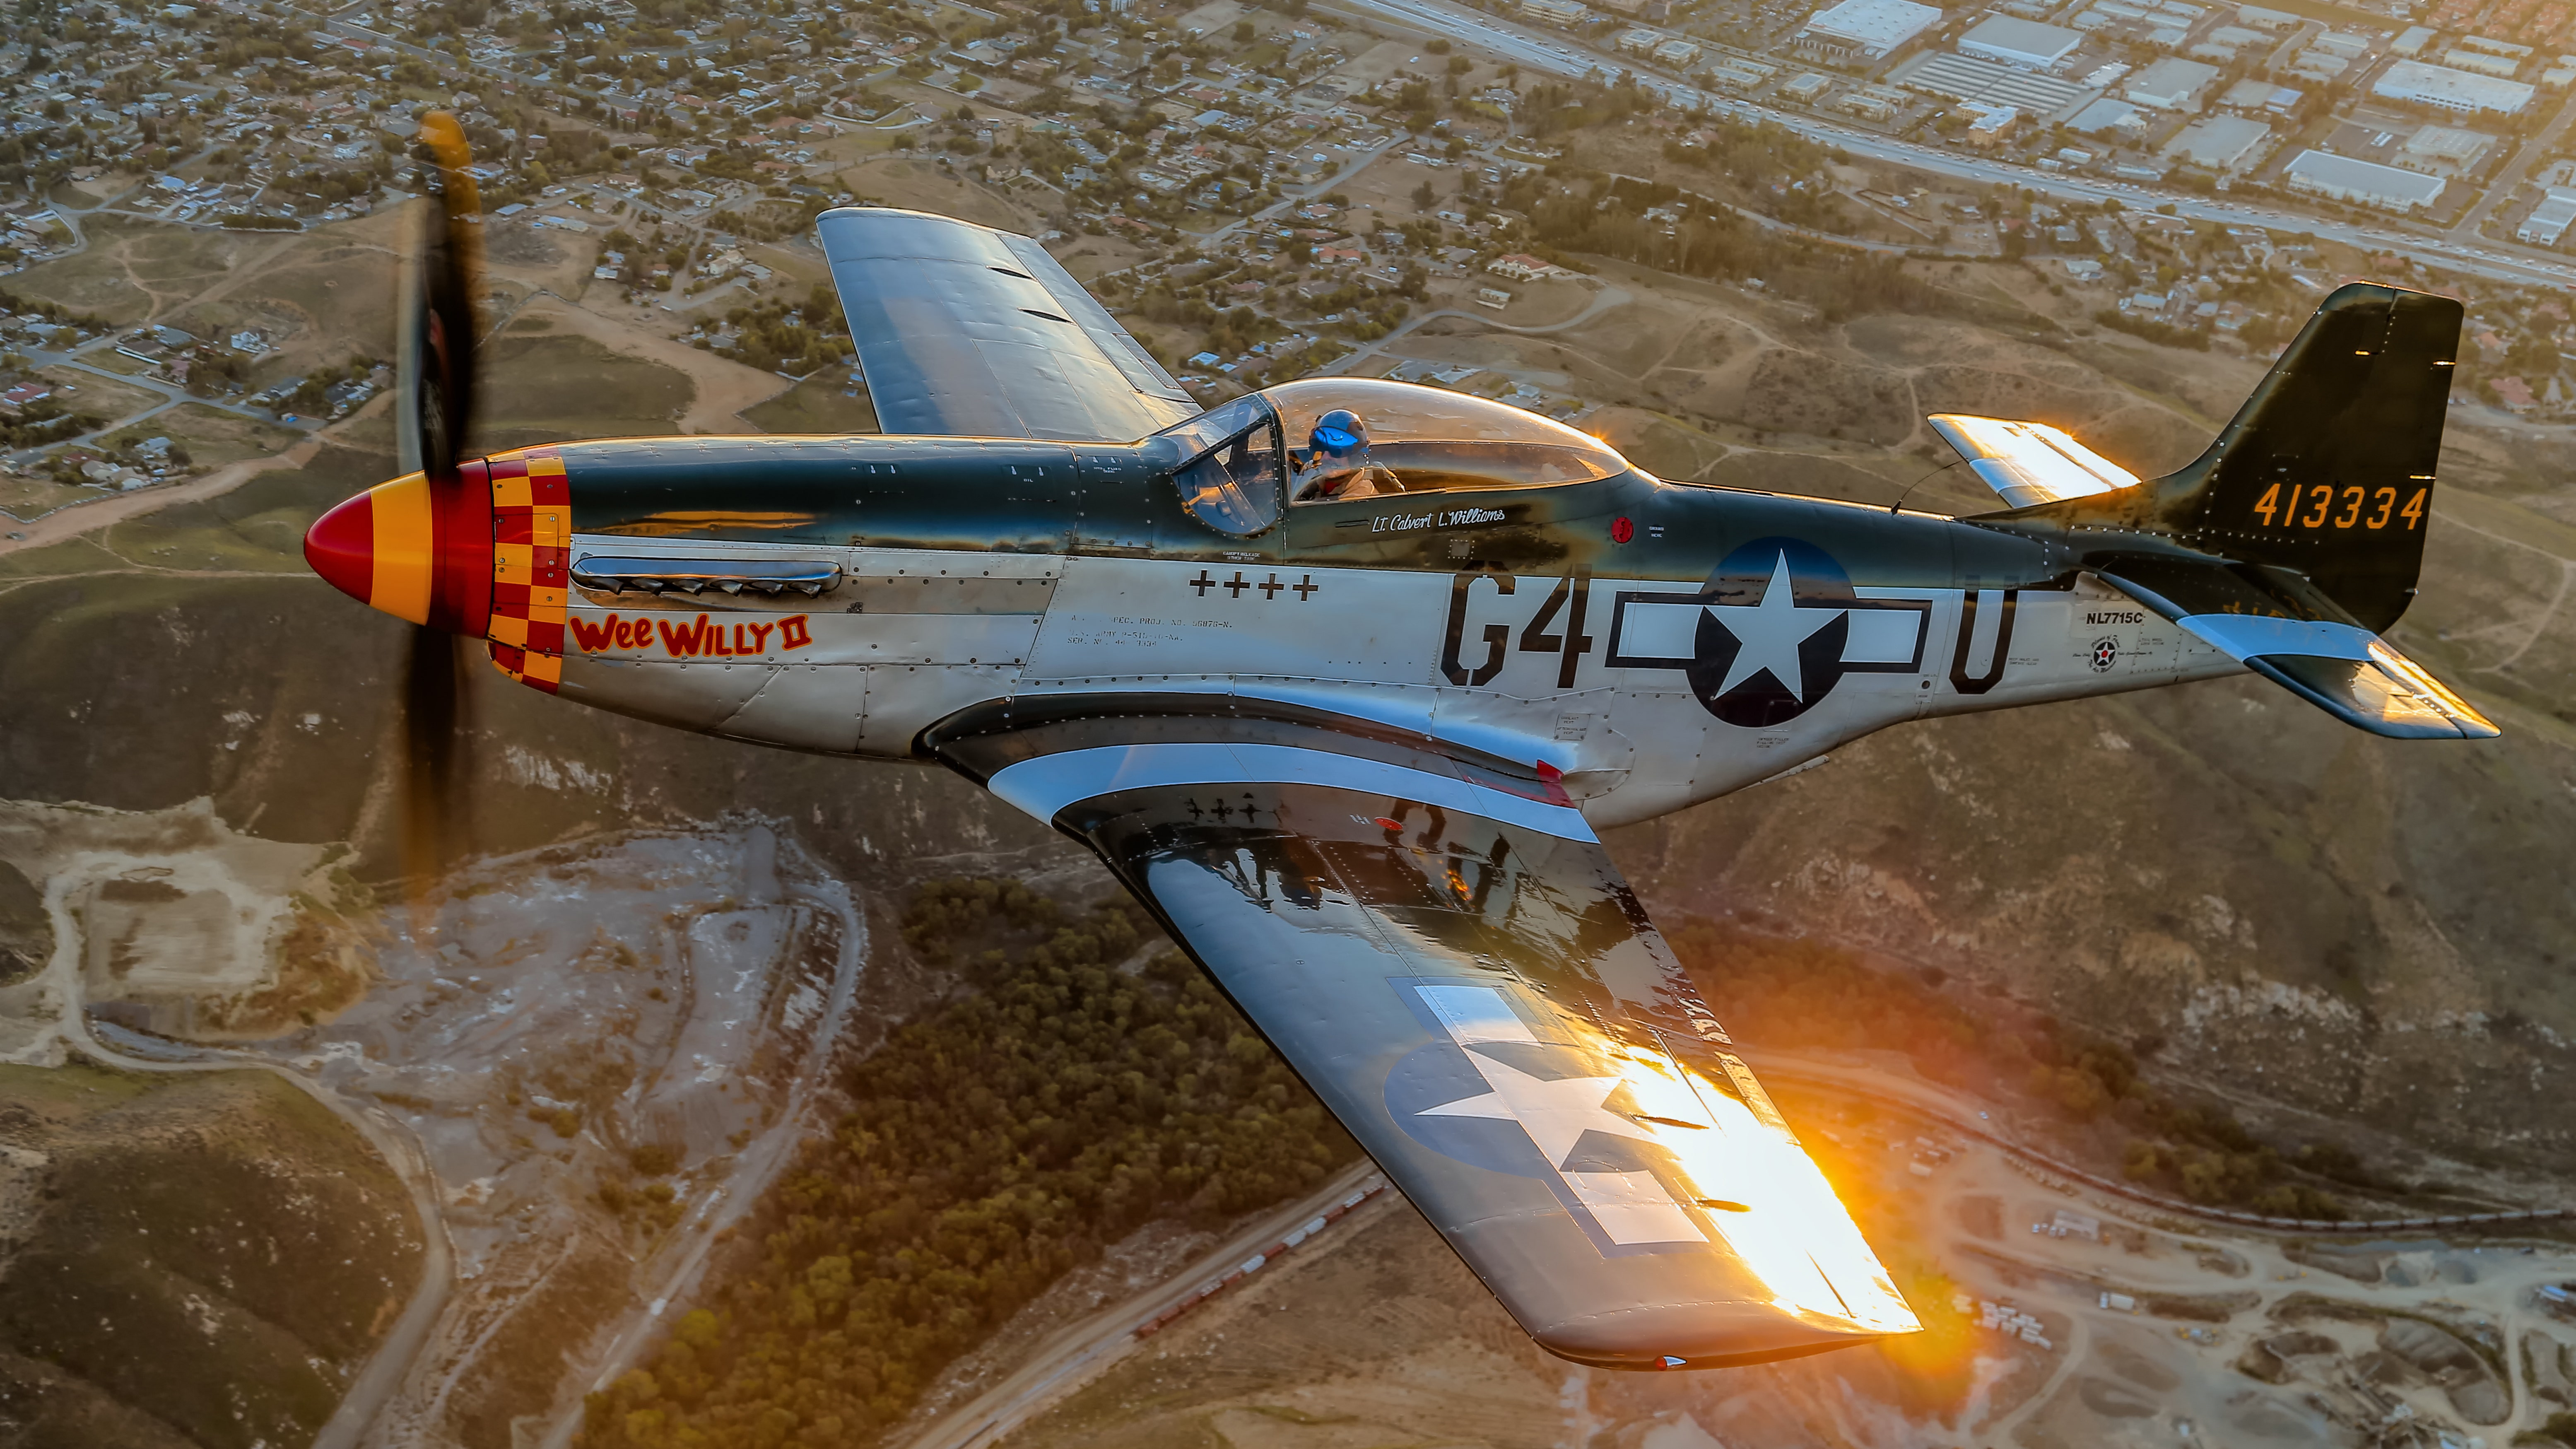 Super Bowl to honor 75th anniversary of the US Air Force with rare